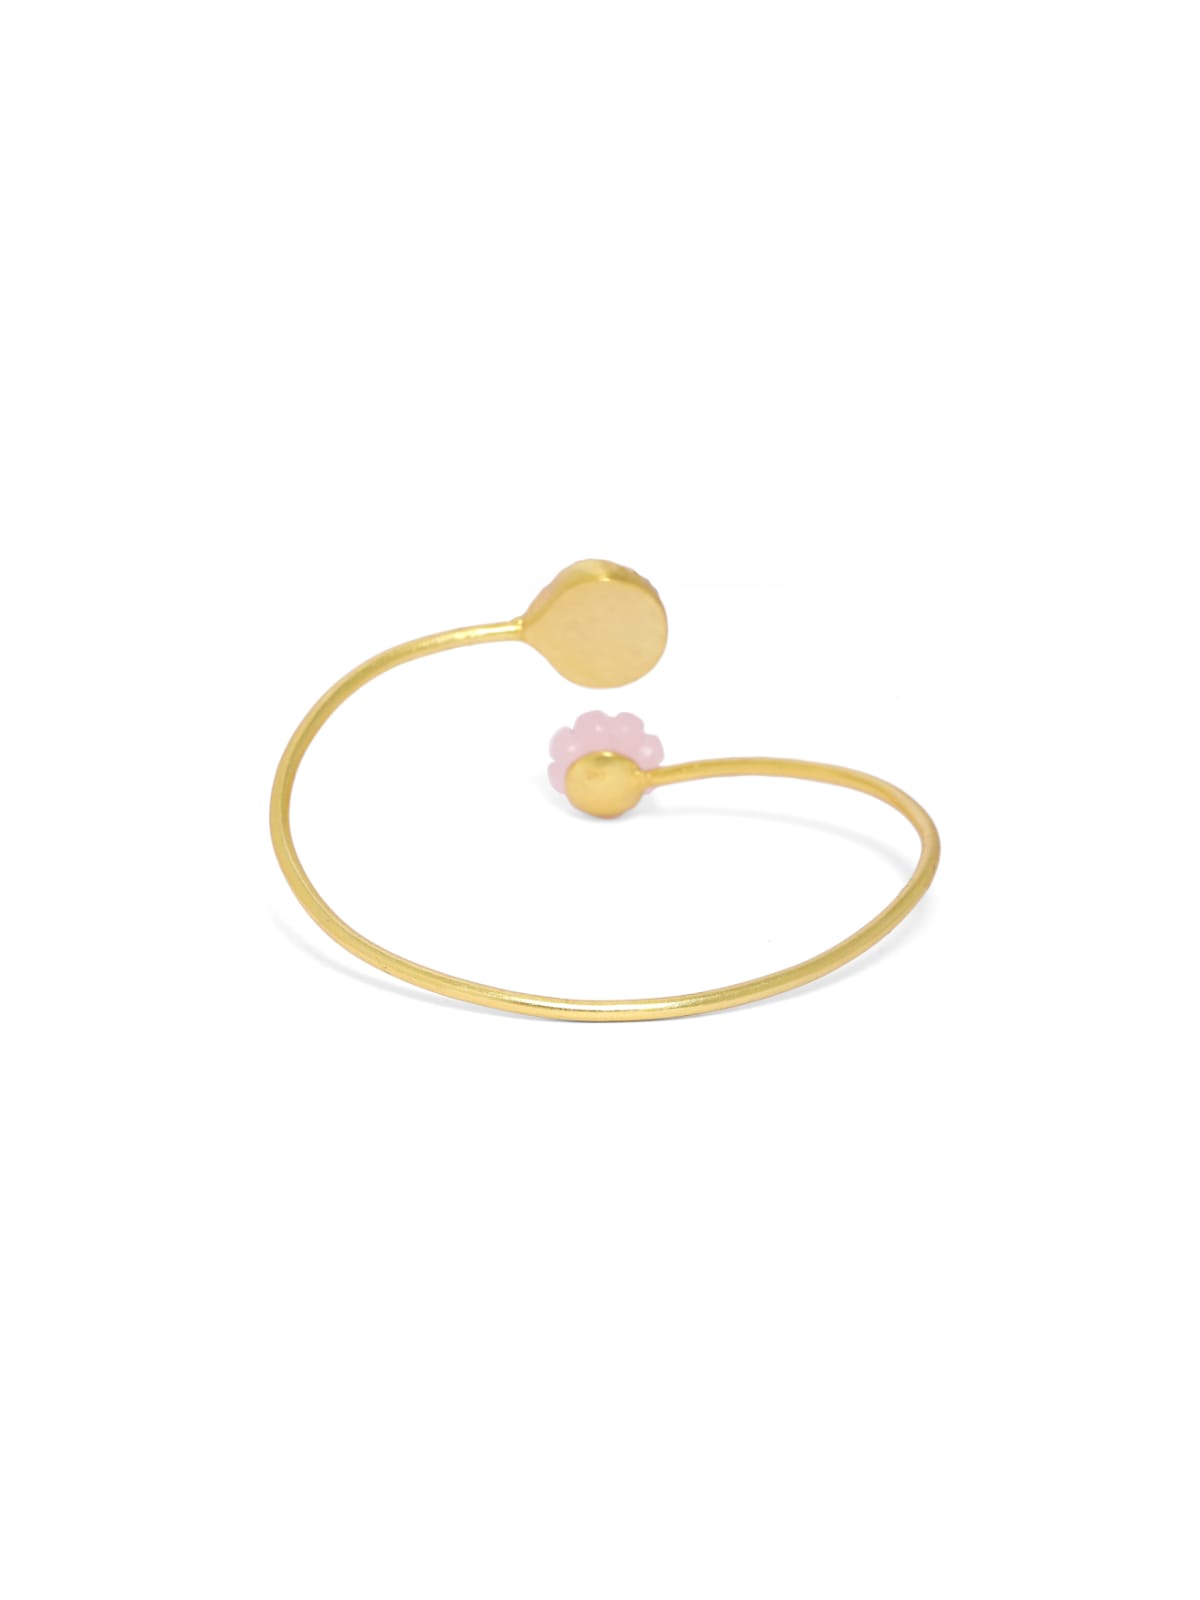 Bracelet carved with pink Chalcydony stone set in sterling Silver with micron Gold plating, adjustable stacking bracelet.